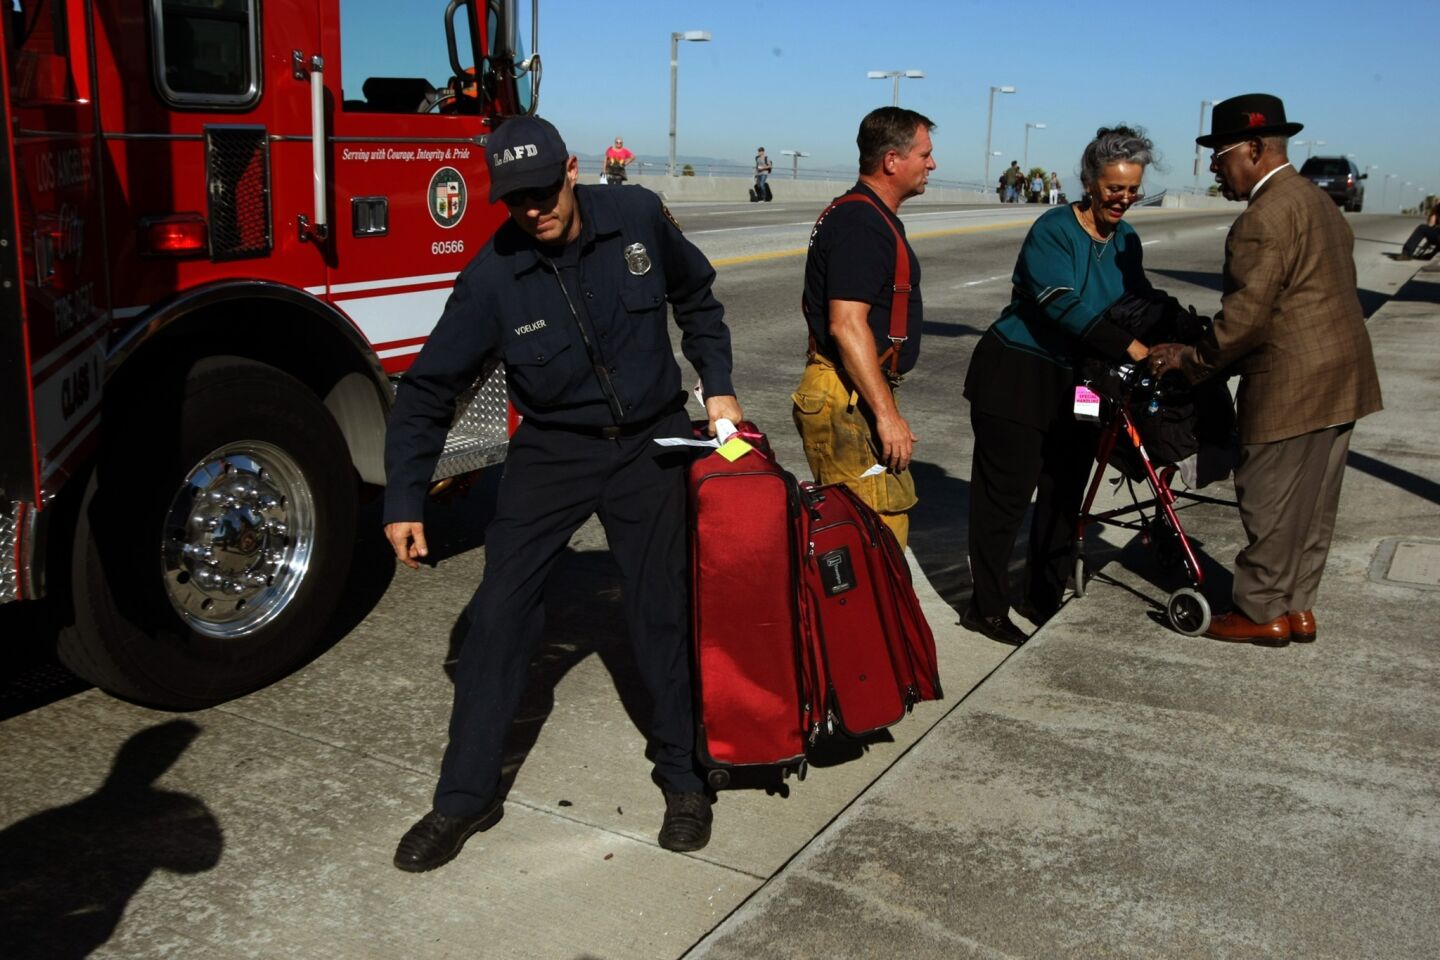 Joseph Heyward, 87, right, and his wife get help with their luggage and a ride from Los Angeles firefighters.